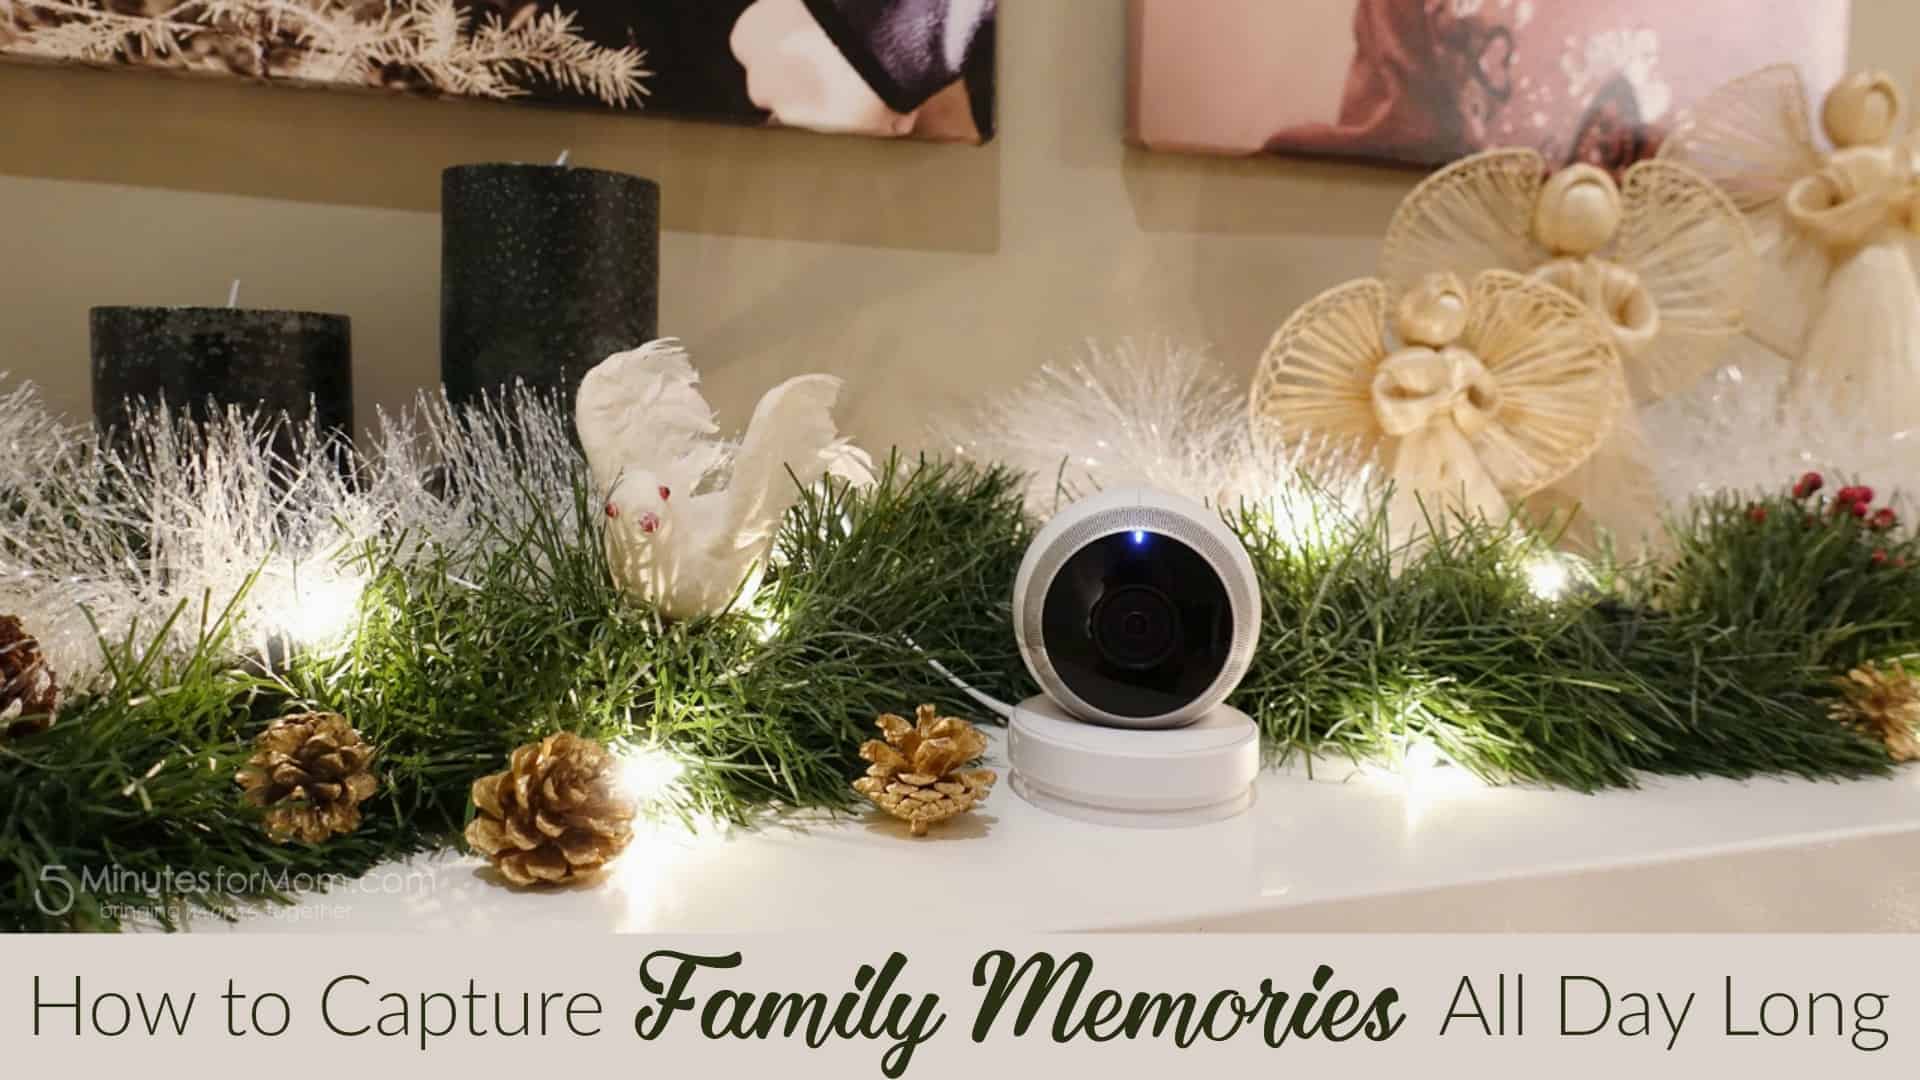 How to Capture Family Memories All Day Long